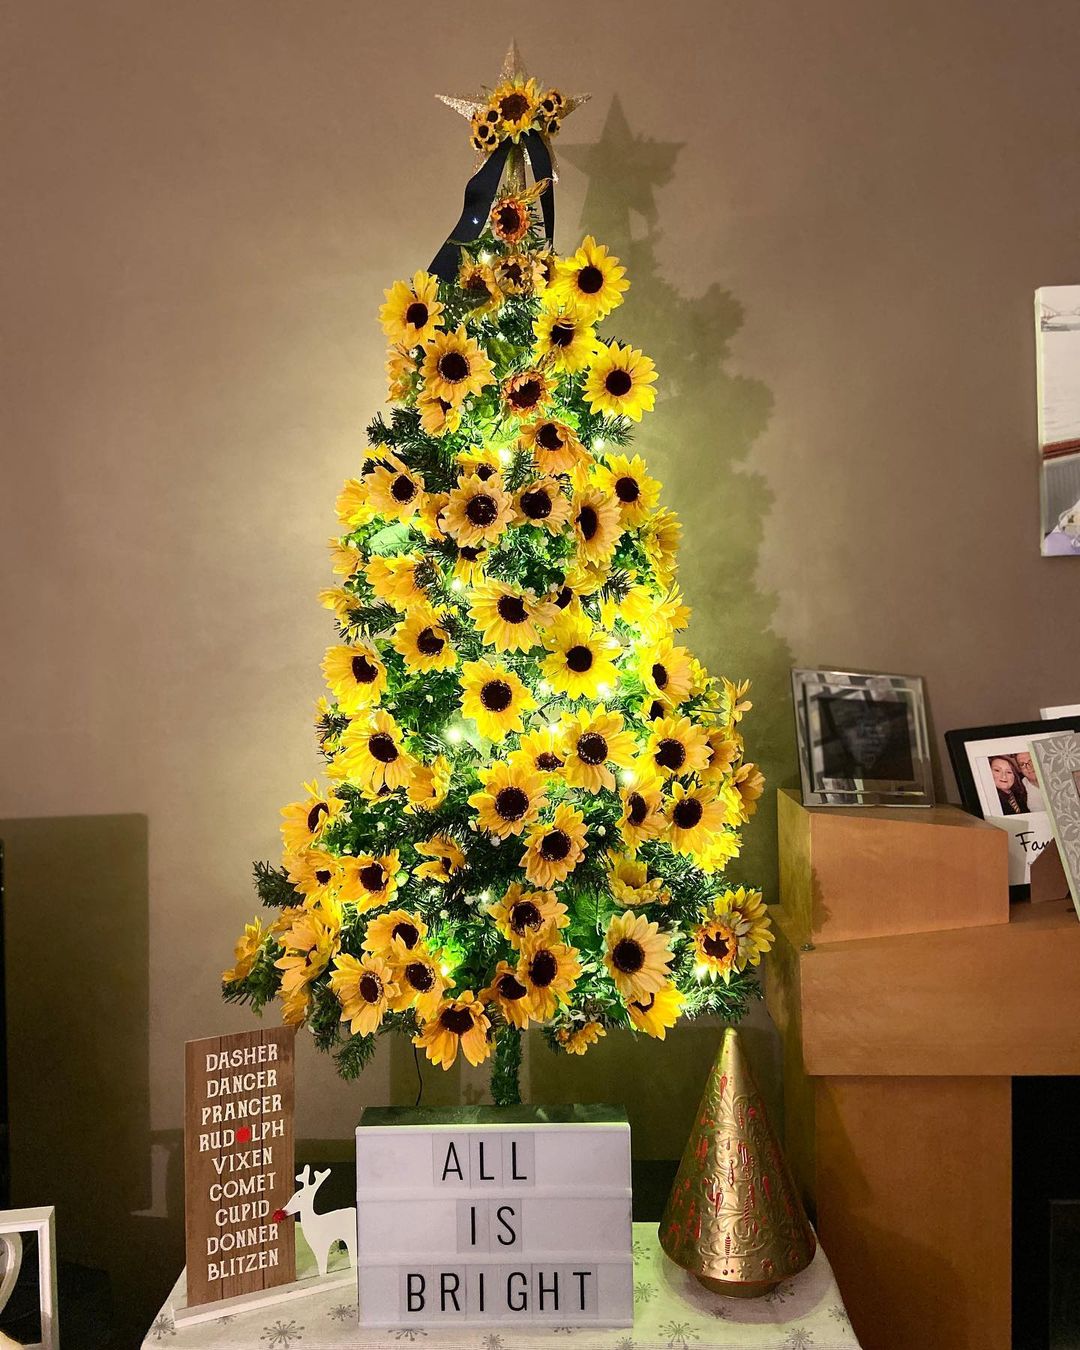 Sunflower Christmas Trees That Are Merry and Bright | Bridal ...